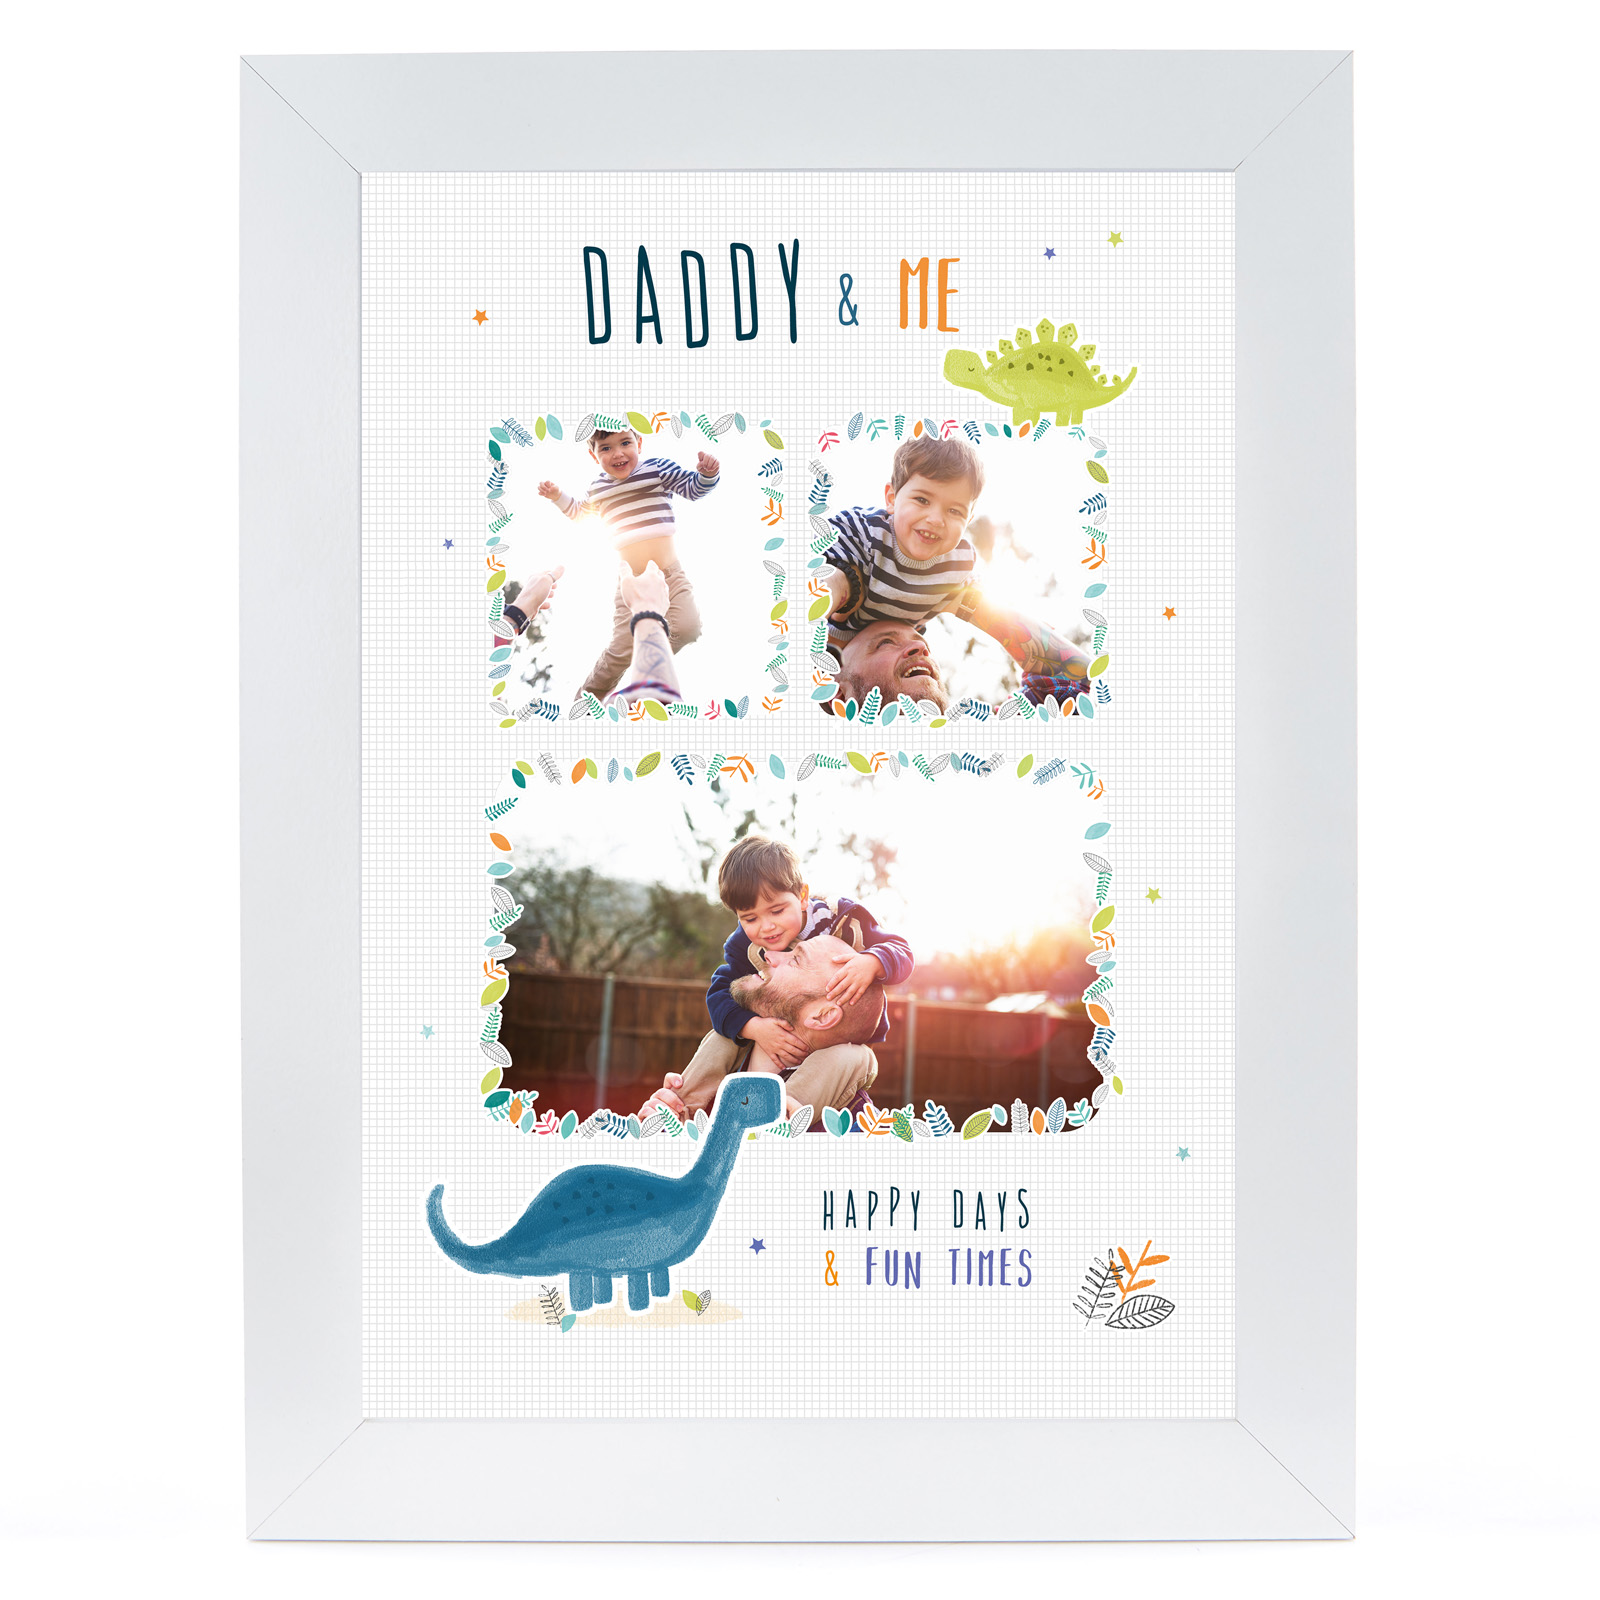 Personalised Photo Print - Daddy & Me